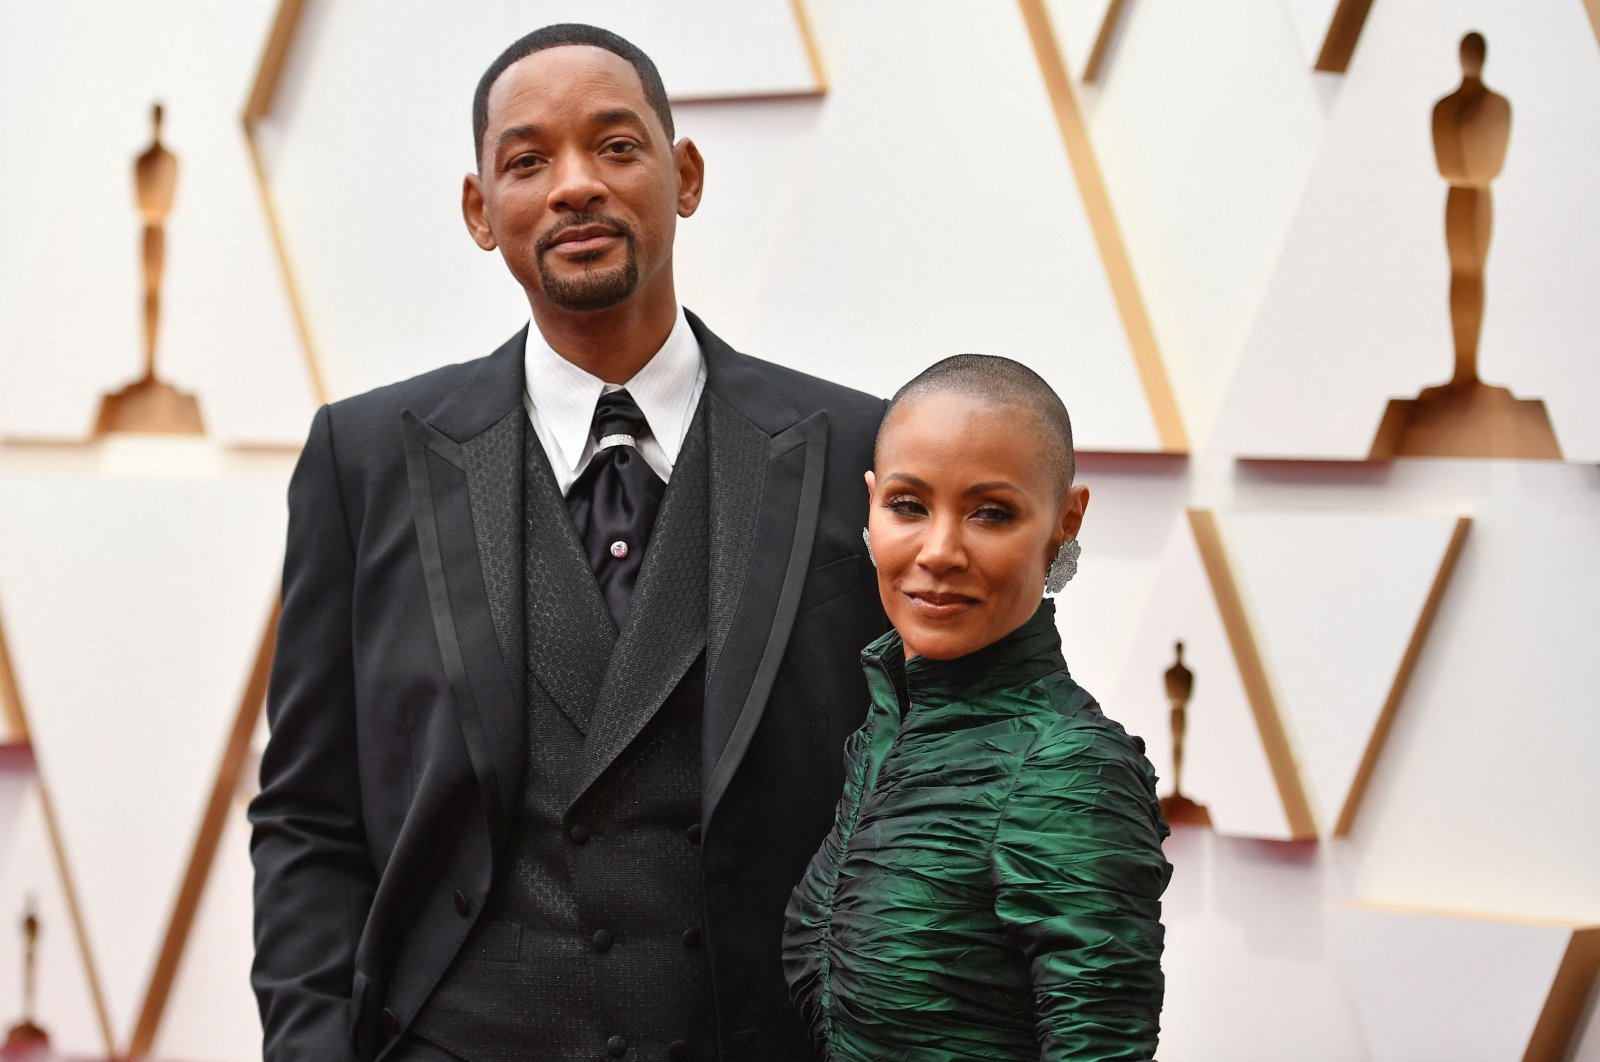 In this file photo taken on March 27, 2022, U.S. actor Will Smith and his wife actress Jada Pinkett Smith attend the 94th Oscars at the Dolby Theater in Hollywood, California, U.S. (AFP)